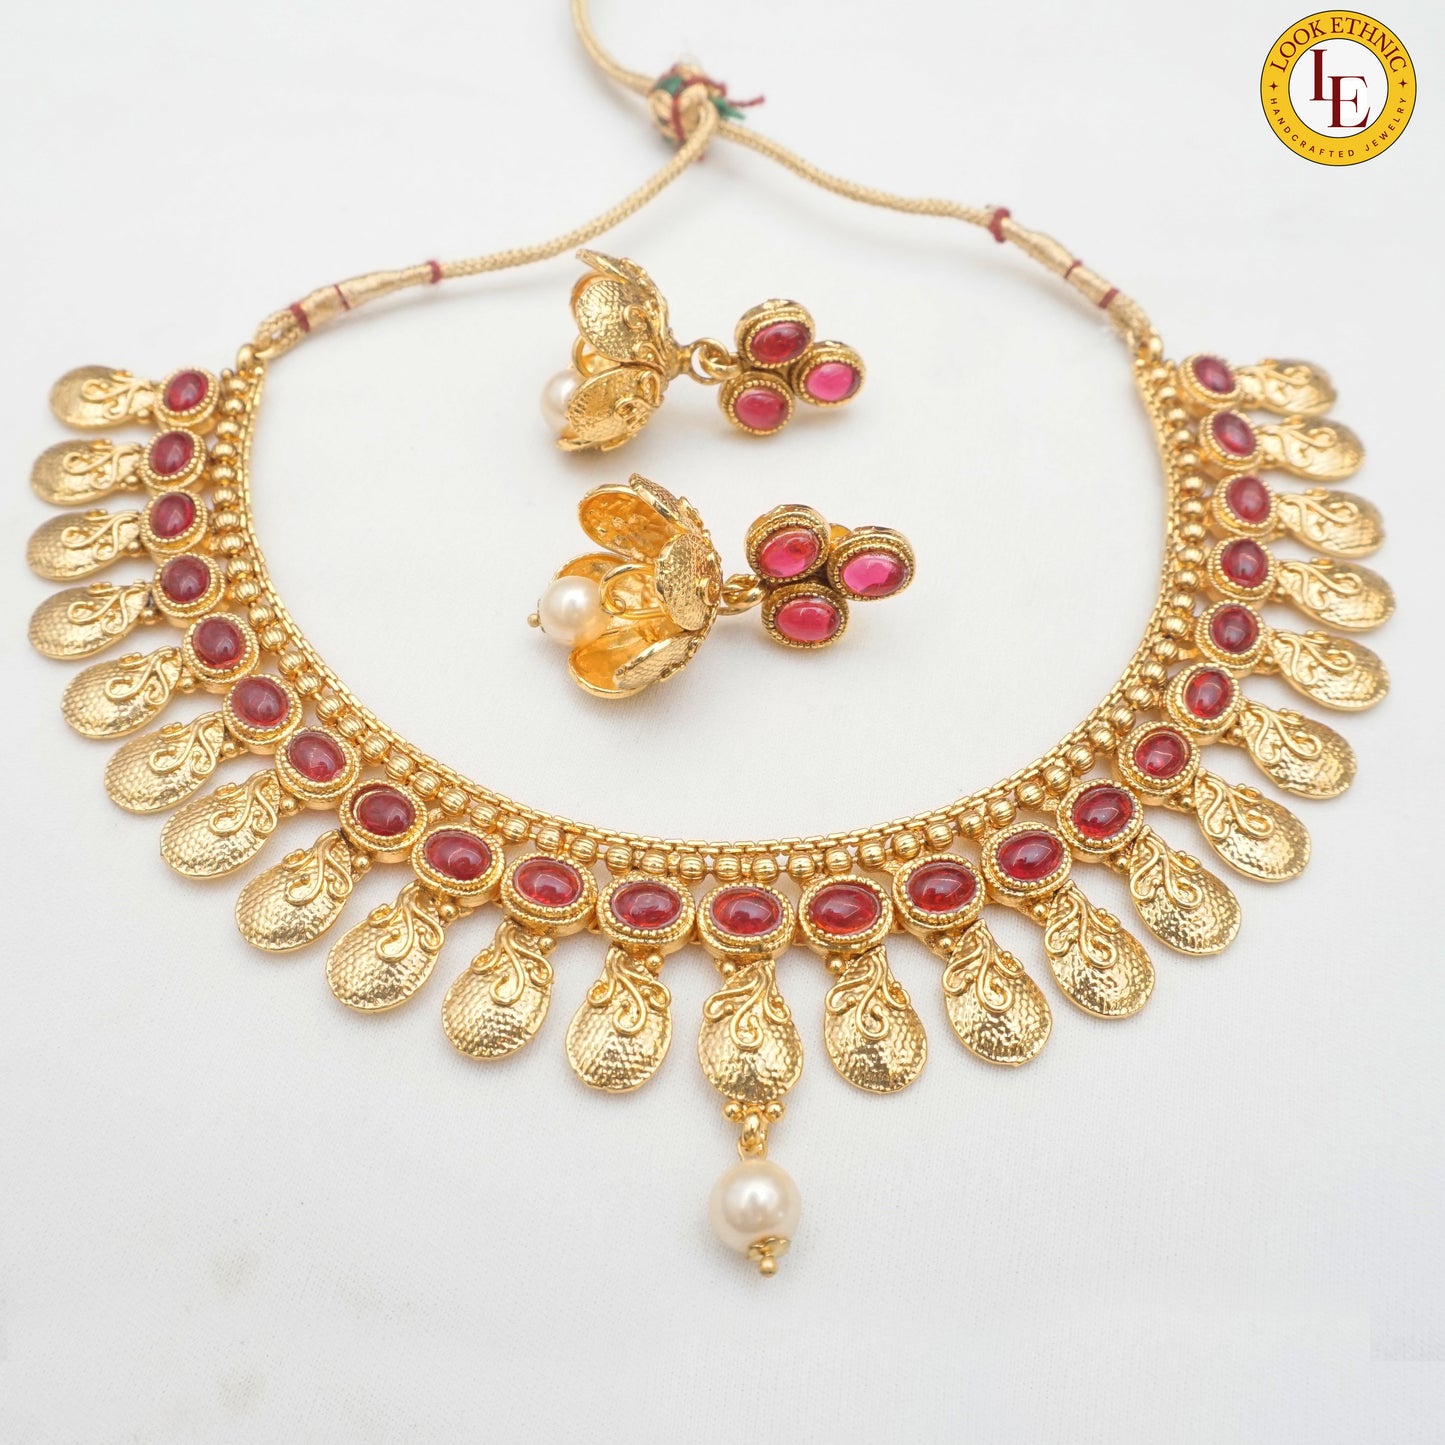 Bring a touch of elegance to your outfit with our Gold Plated Short Necklace Set